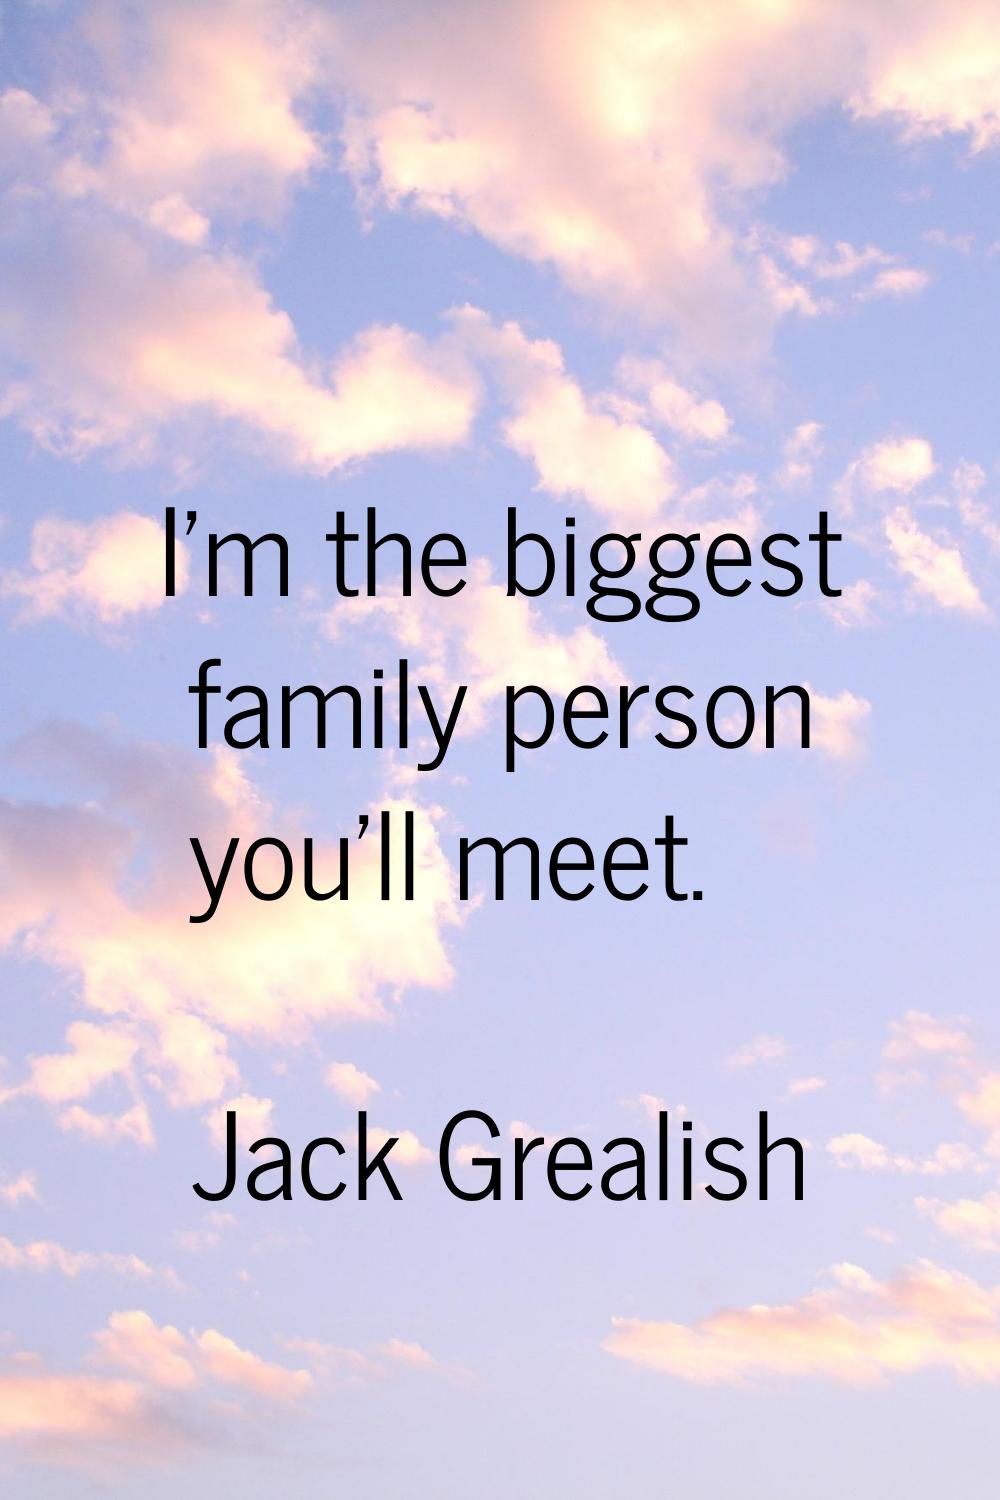 I'm the biggest family person you'll meet.